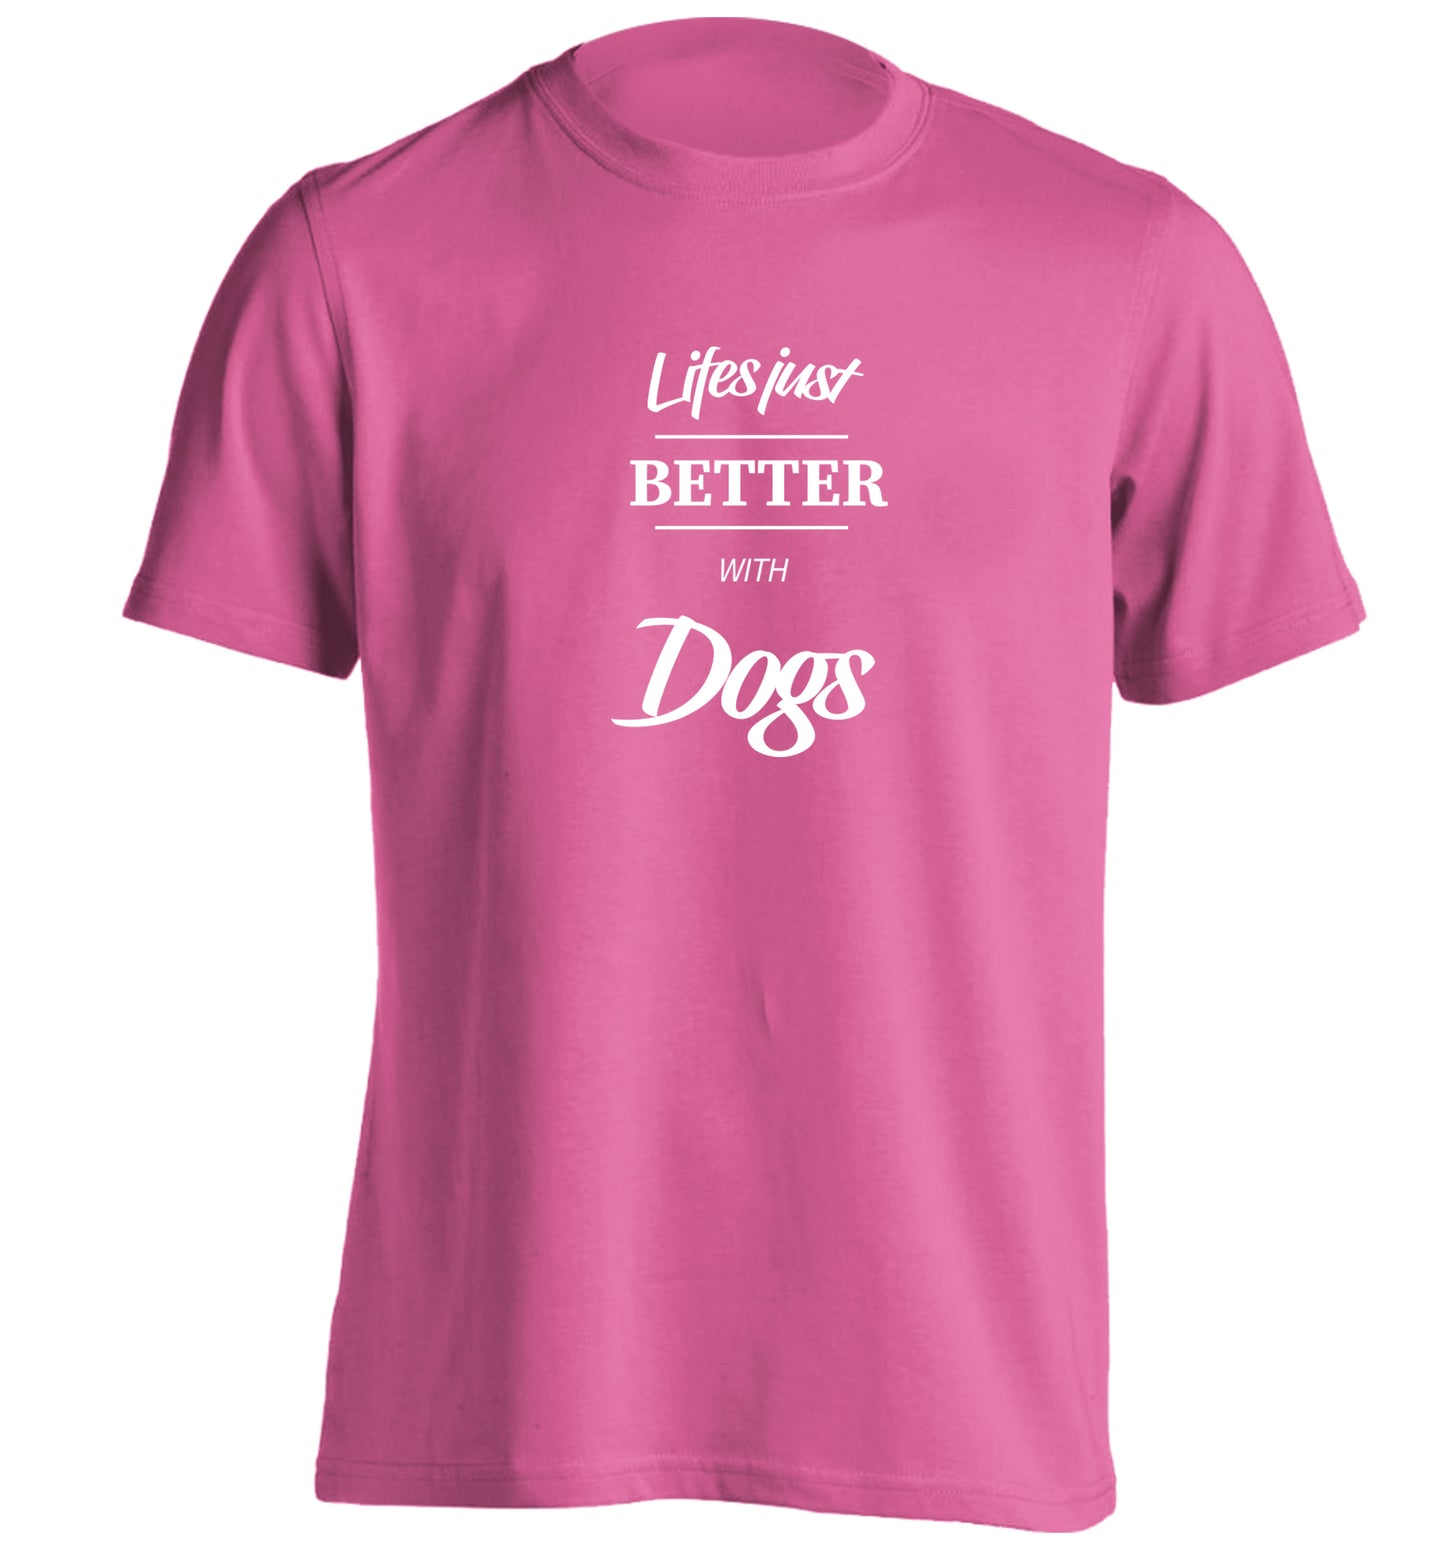 life is better with dogs adults unisex pink Tshirt 2XL